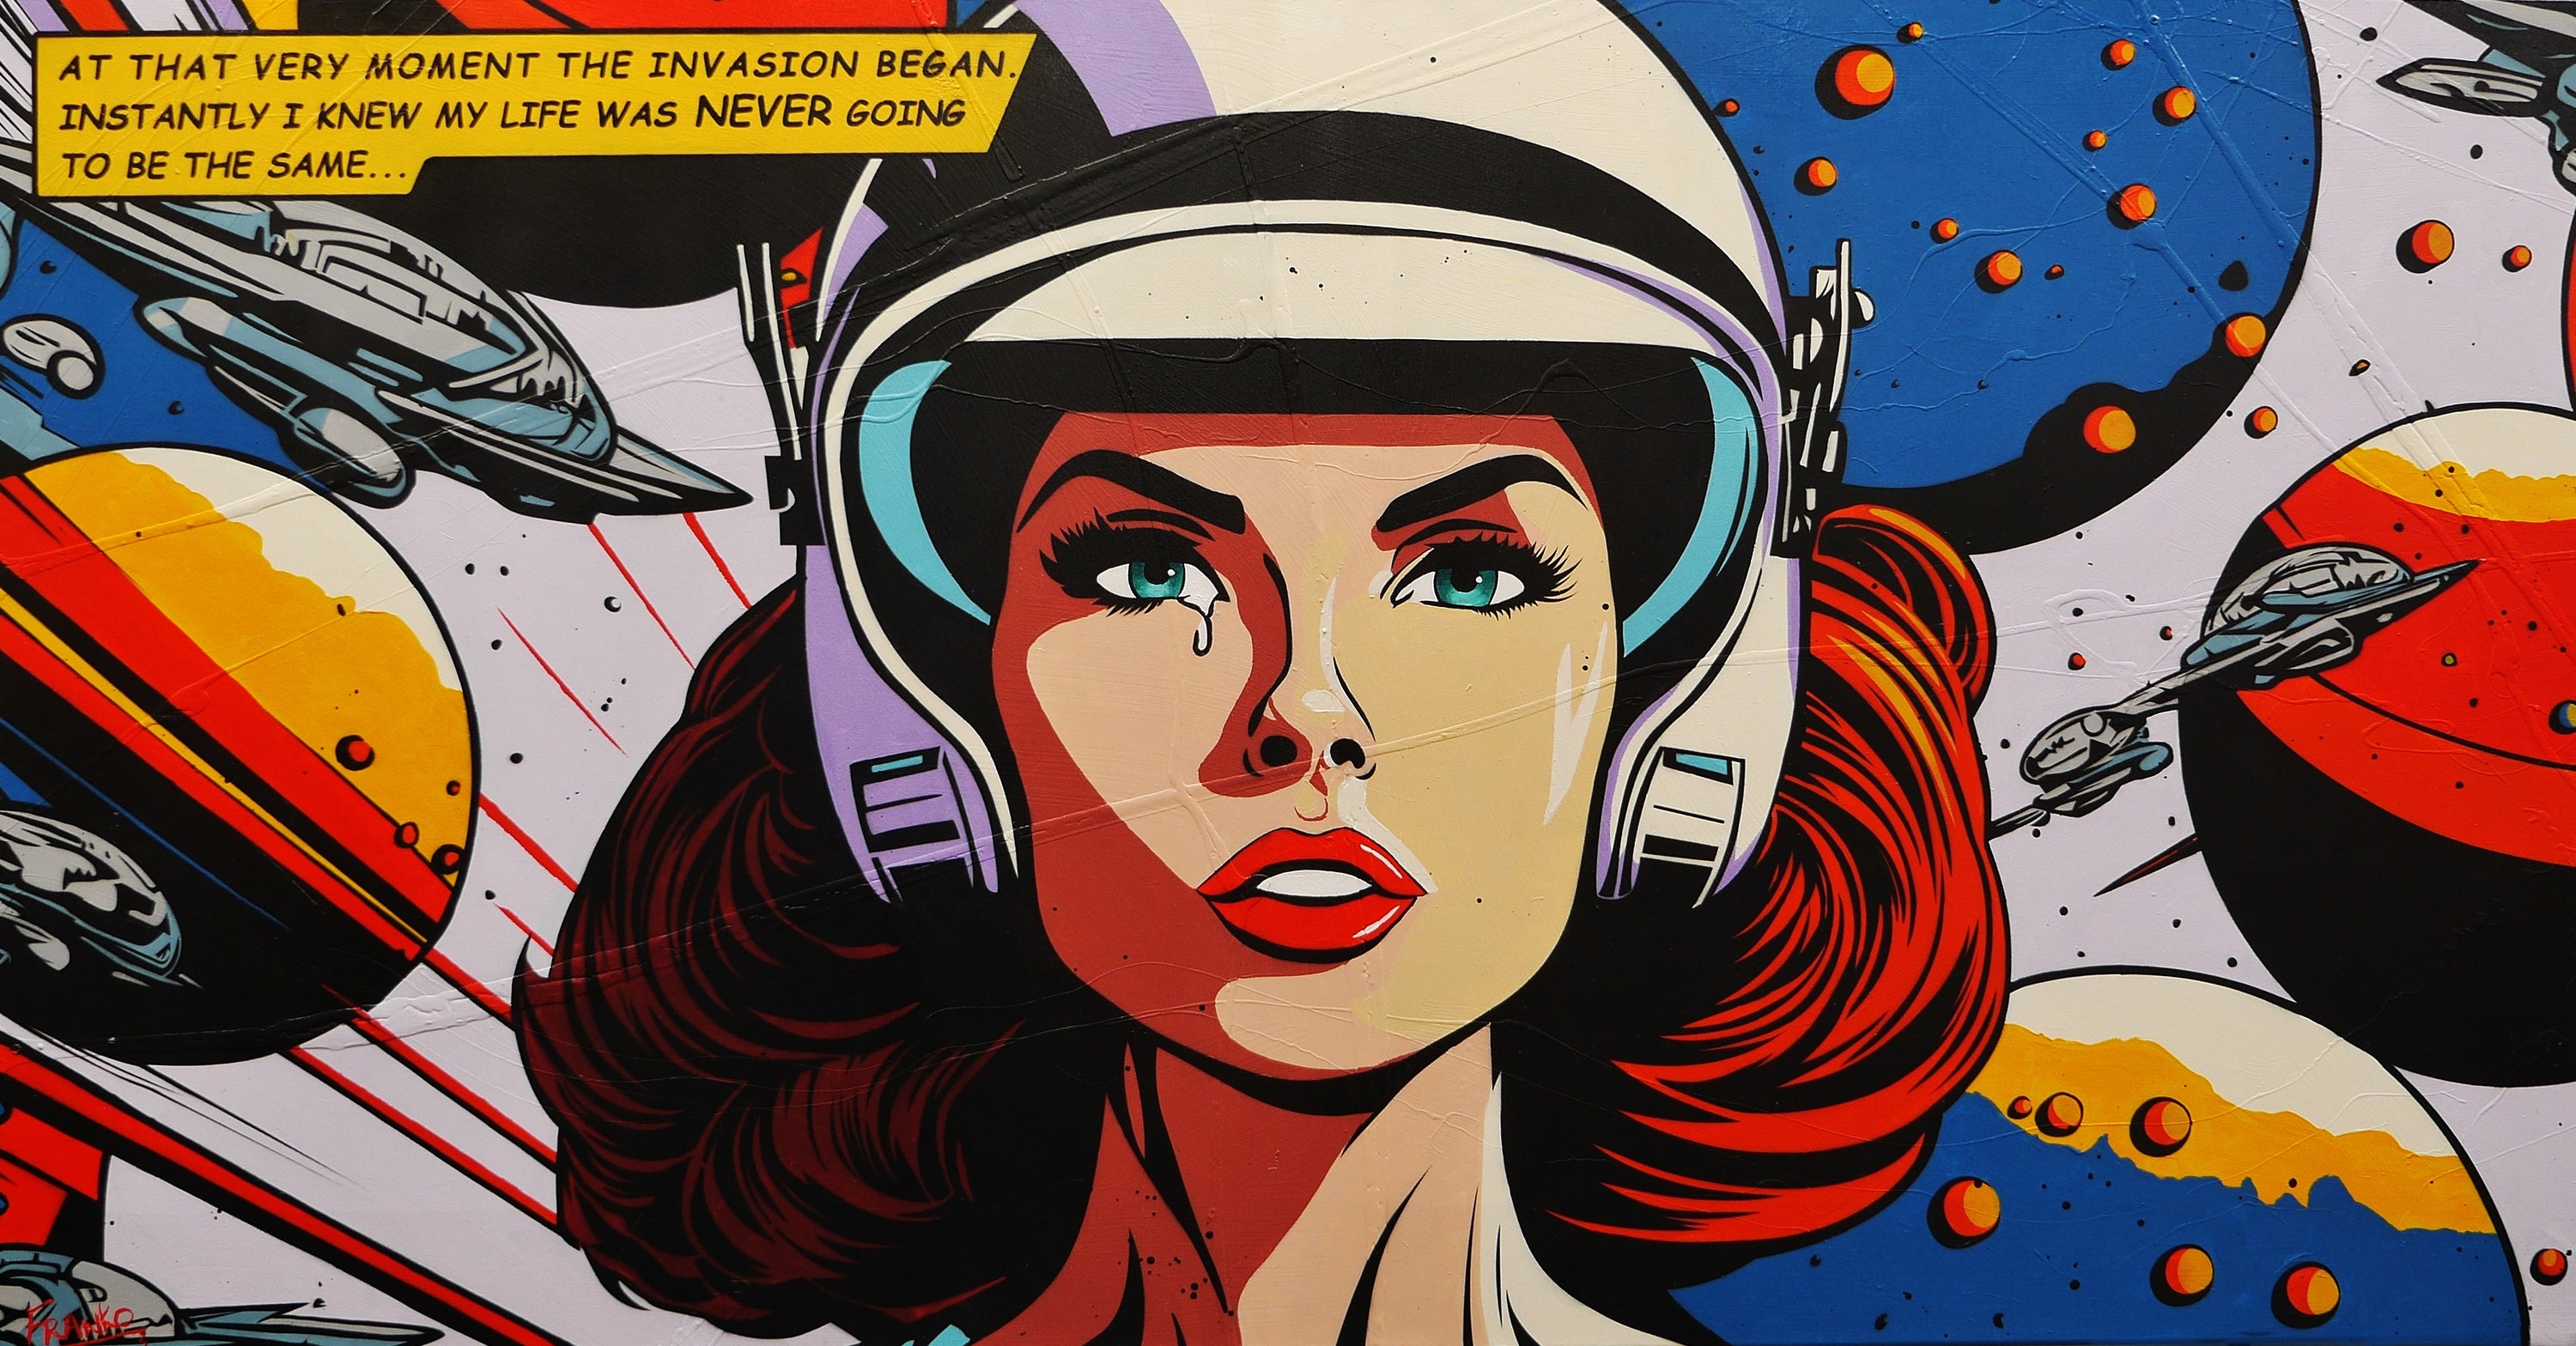 Instantly ... 190cm x 100cm Space Cadet Textured Urban Pop Art Painting (SOLD)